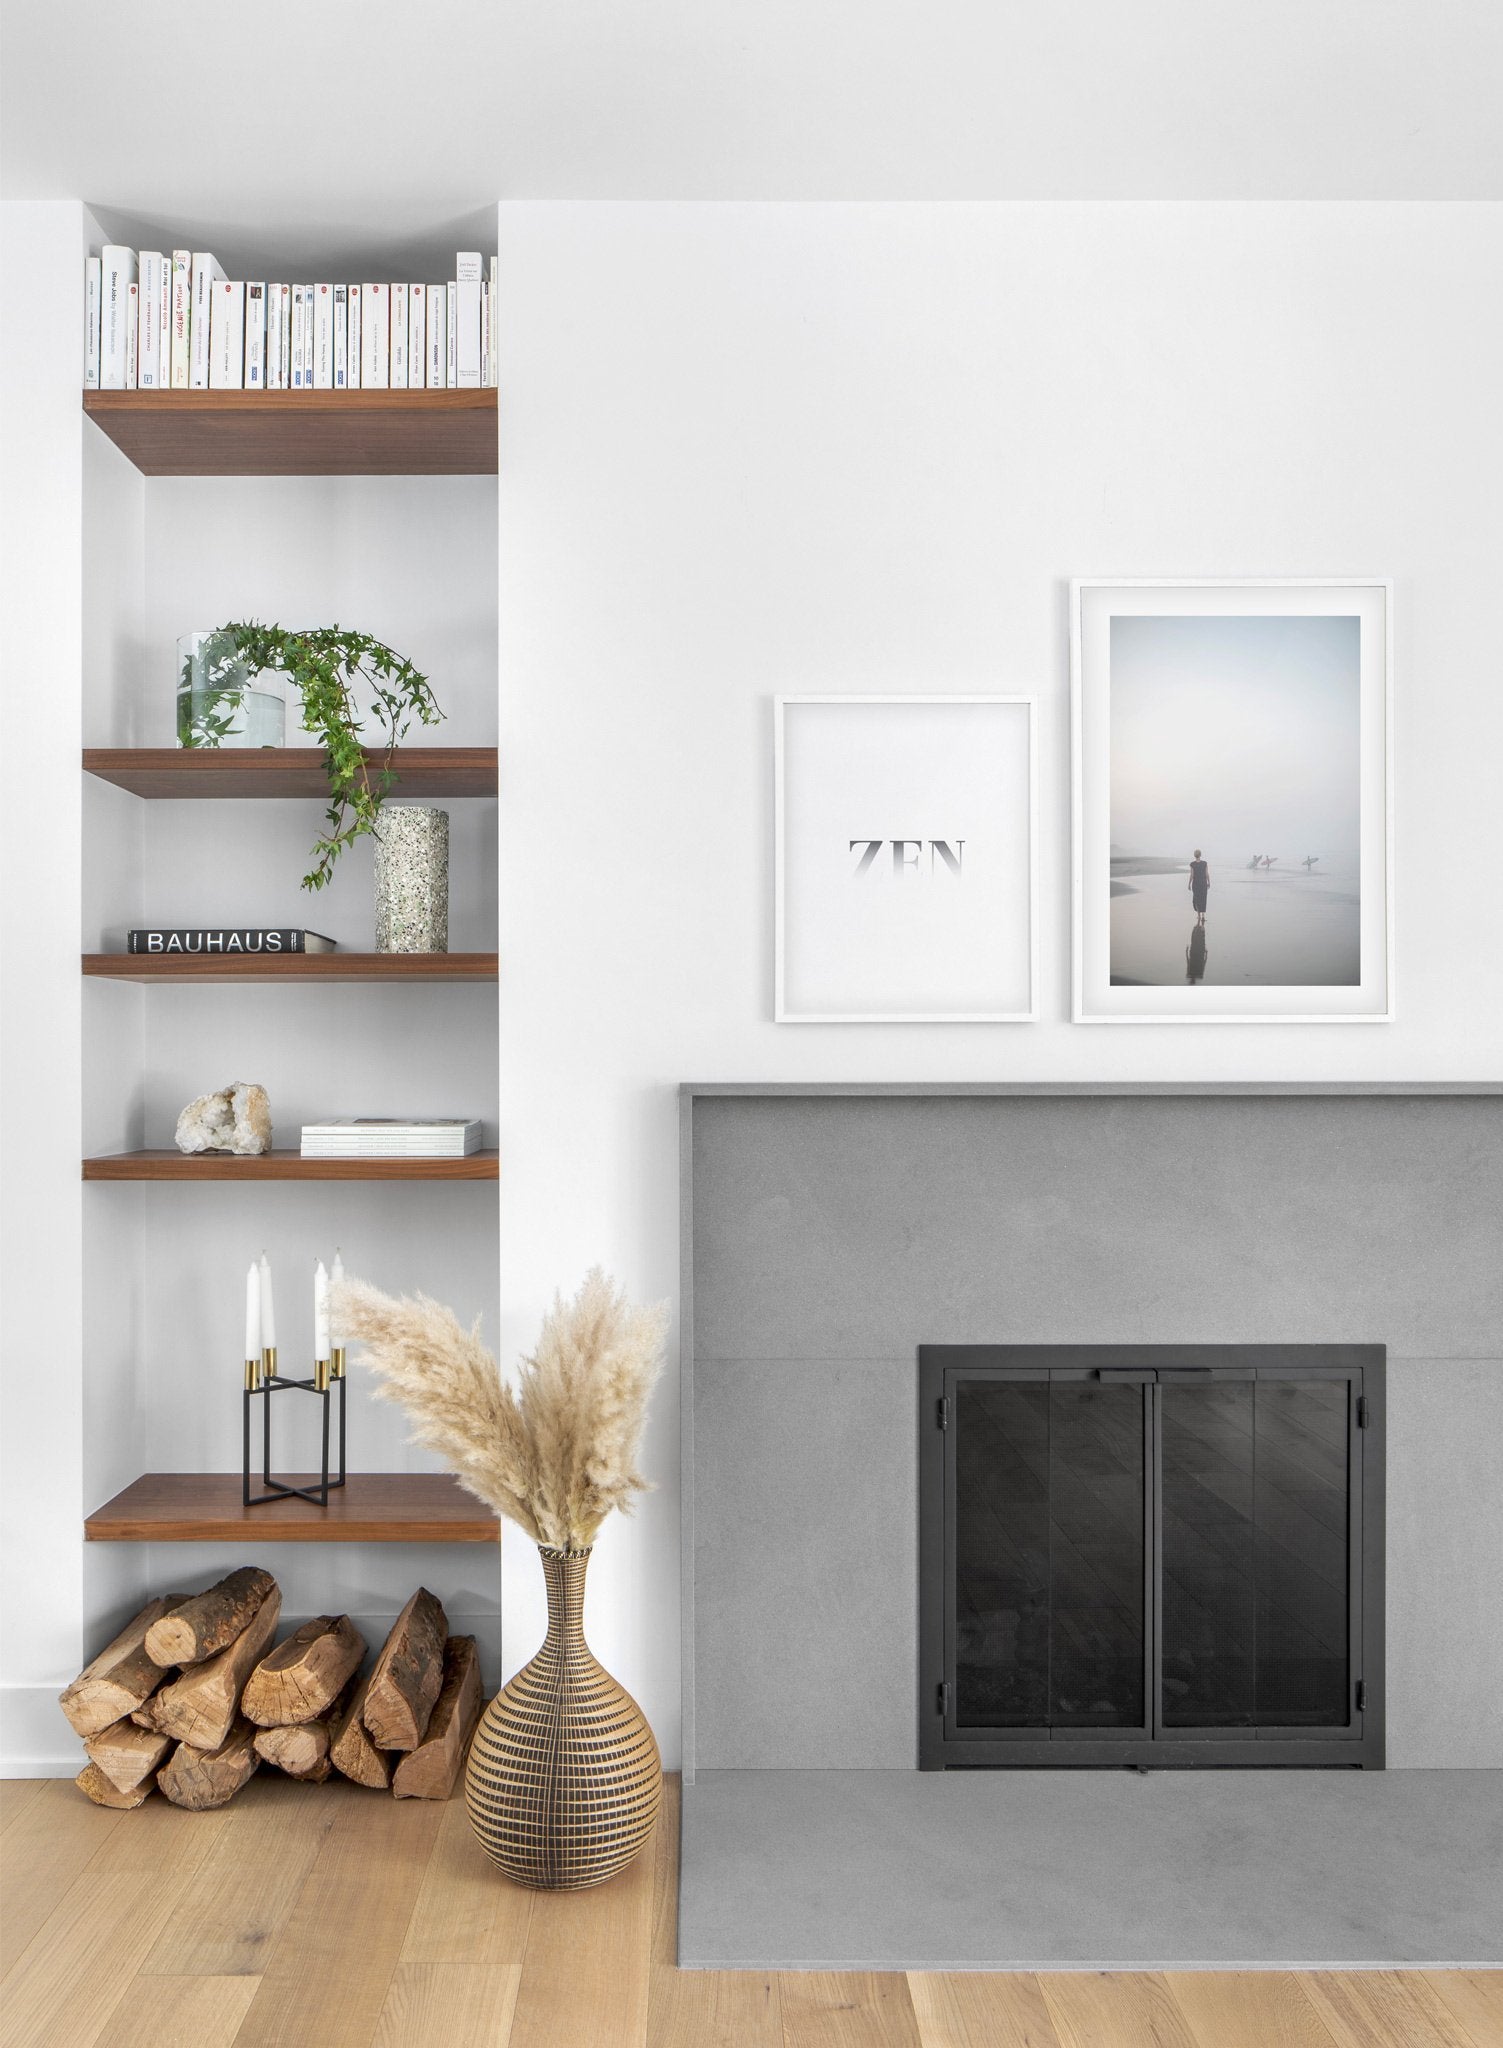 All is Calm modern minimalist photography poster by Opposite Wall - Fireplace - Duo